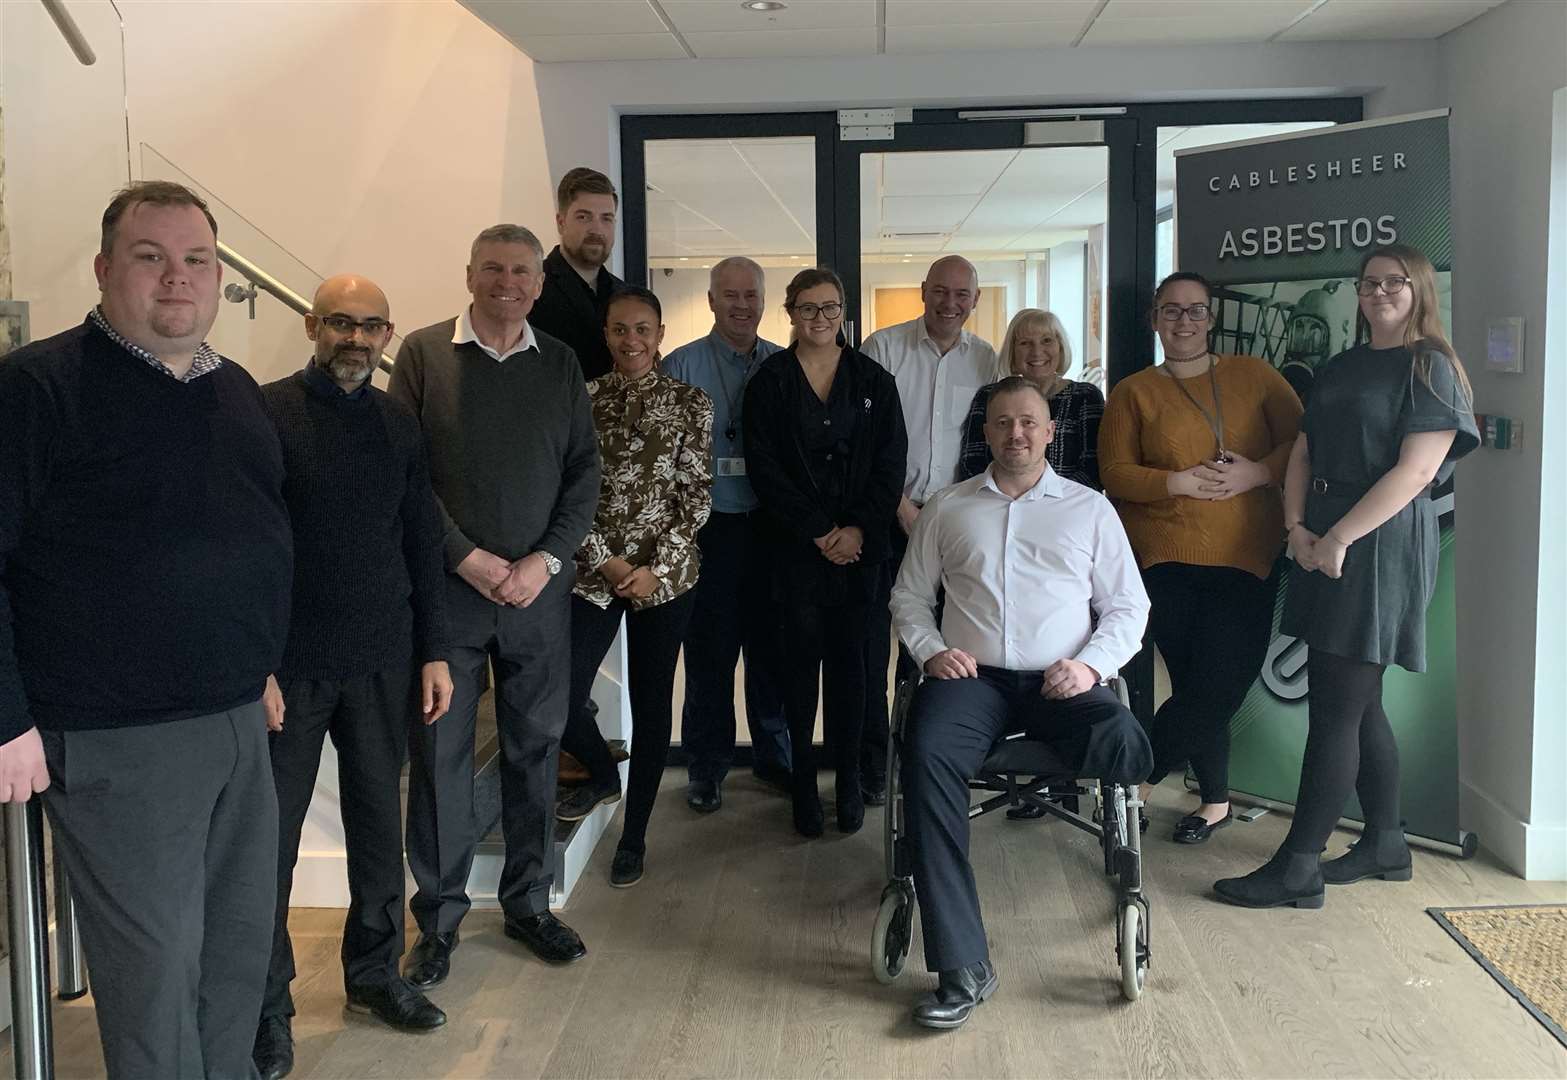 Sean Hasler with his colleagues at Cablesheer Group in Orpington (7717909)